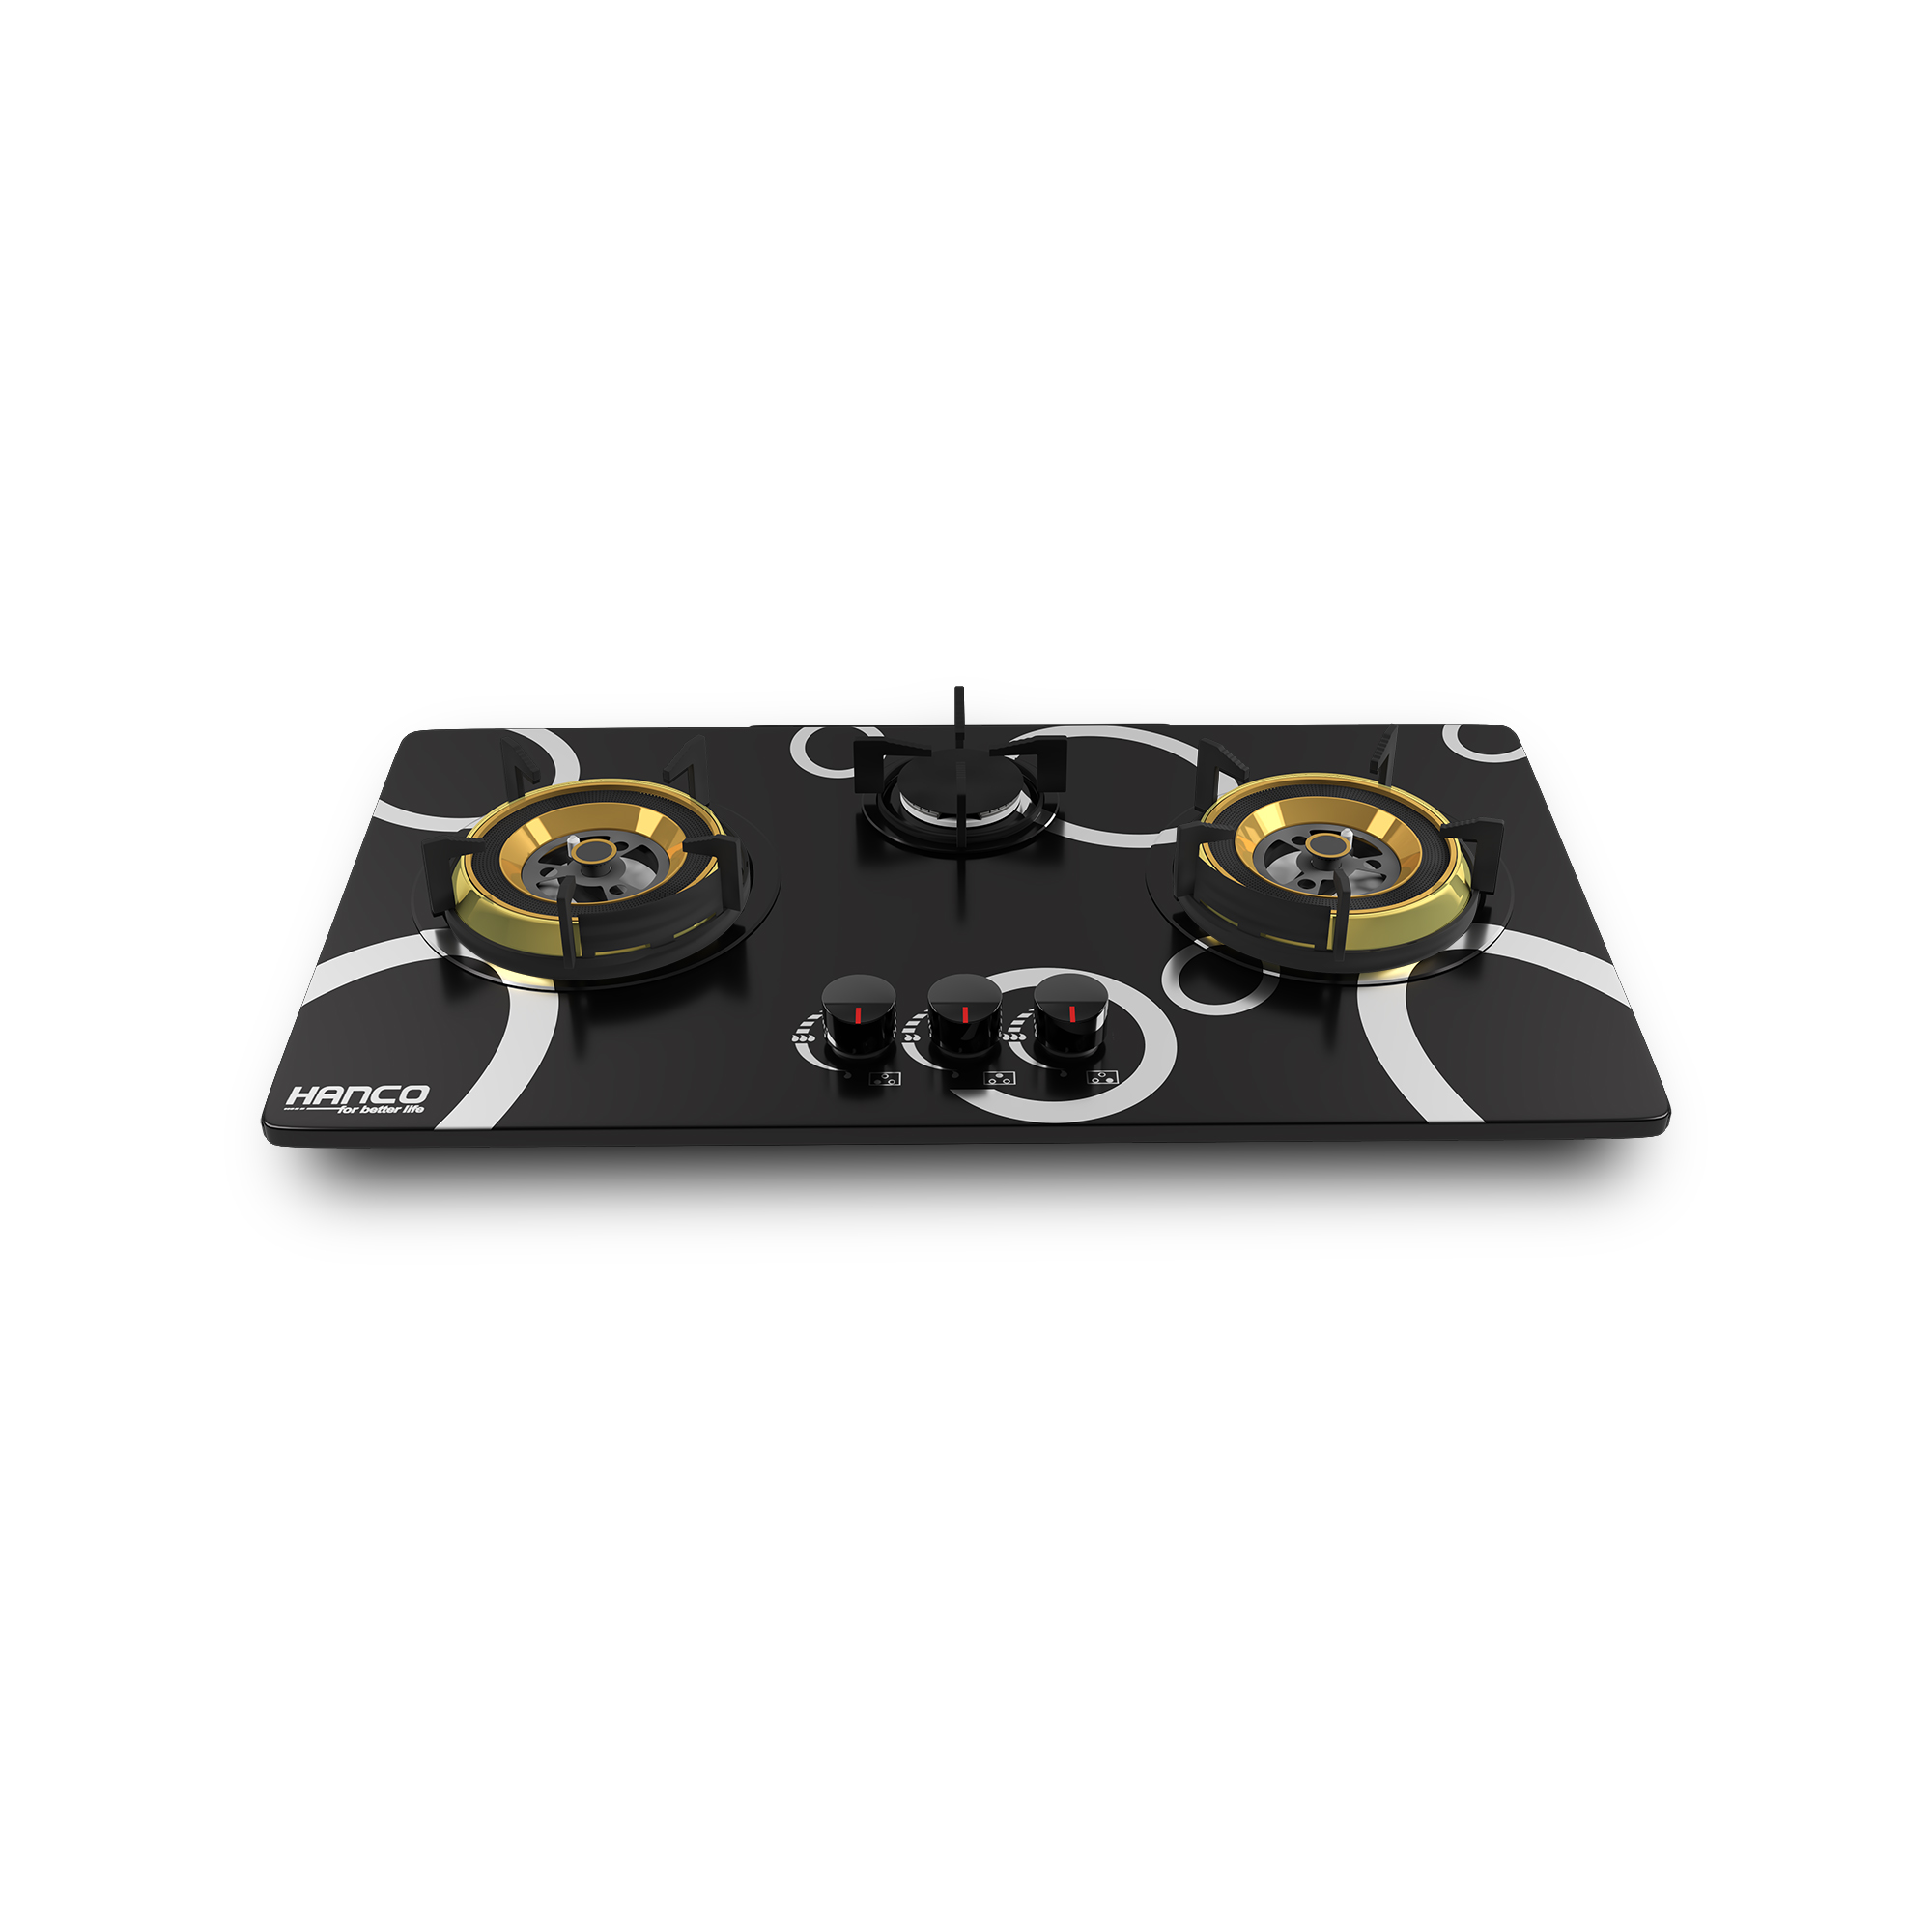 Hanco Stainless Steel Hob With Brass Burners (model 204) - Auto Ignition Stove - Gas Type Ng And Lpg